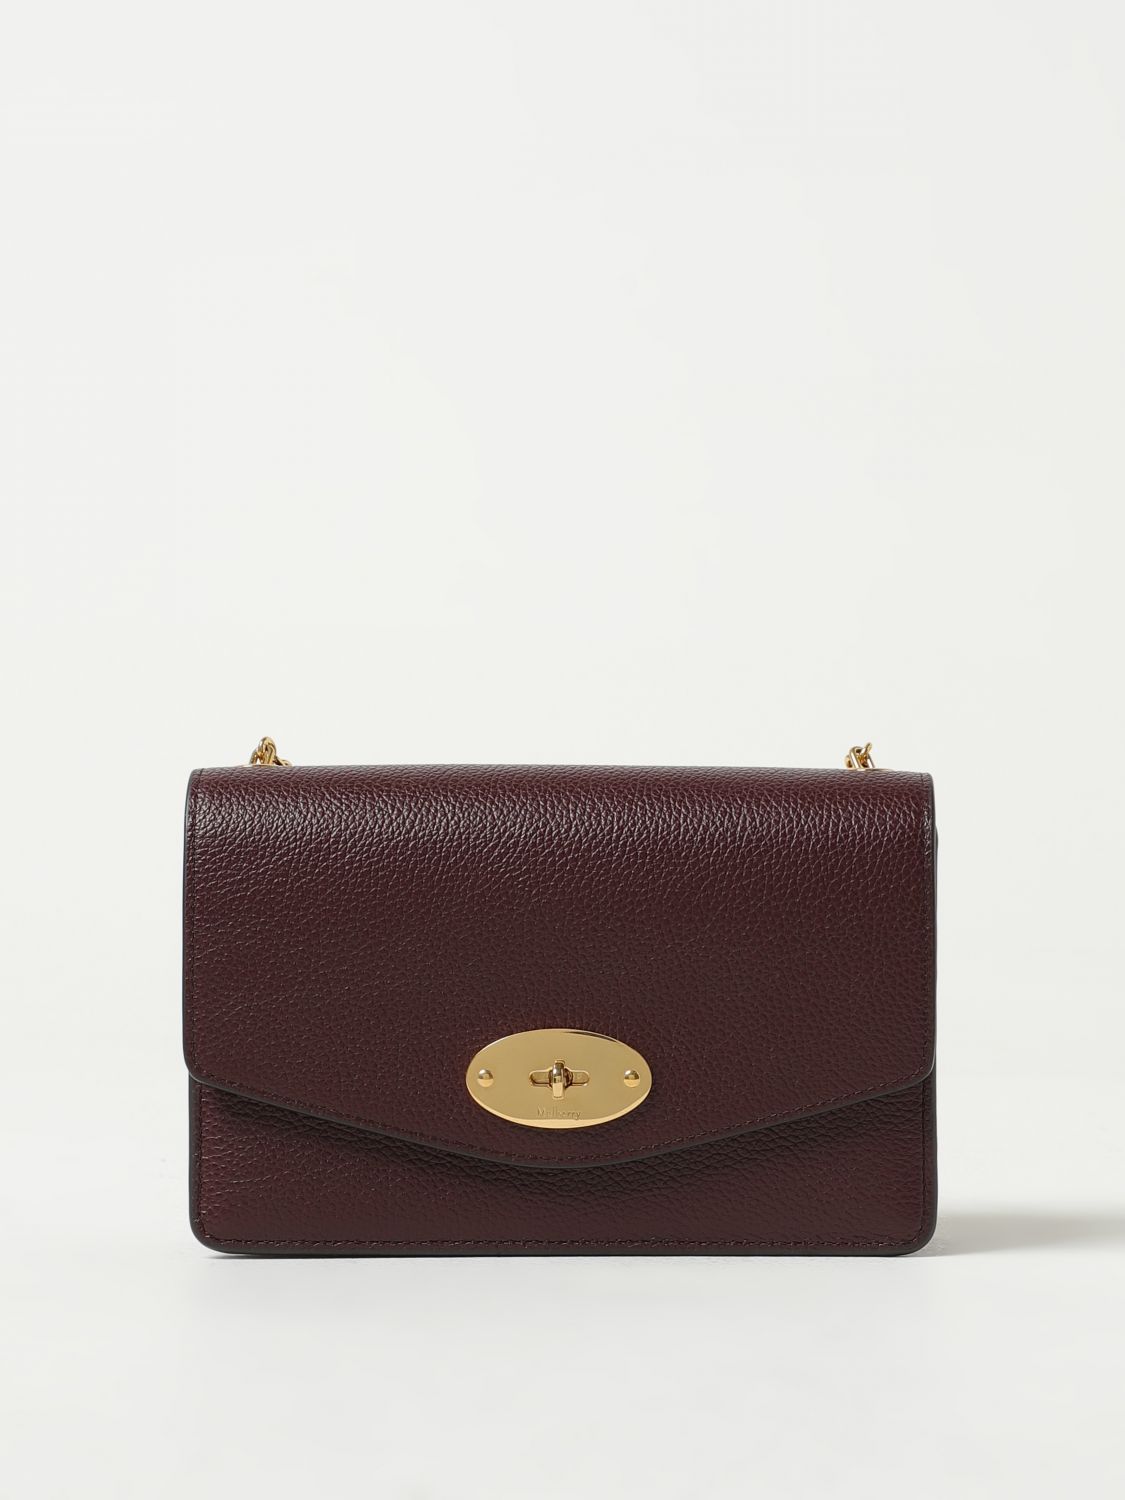 Mulberry Mini Bag MULBERRY Woman colour Brown